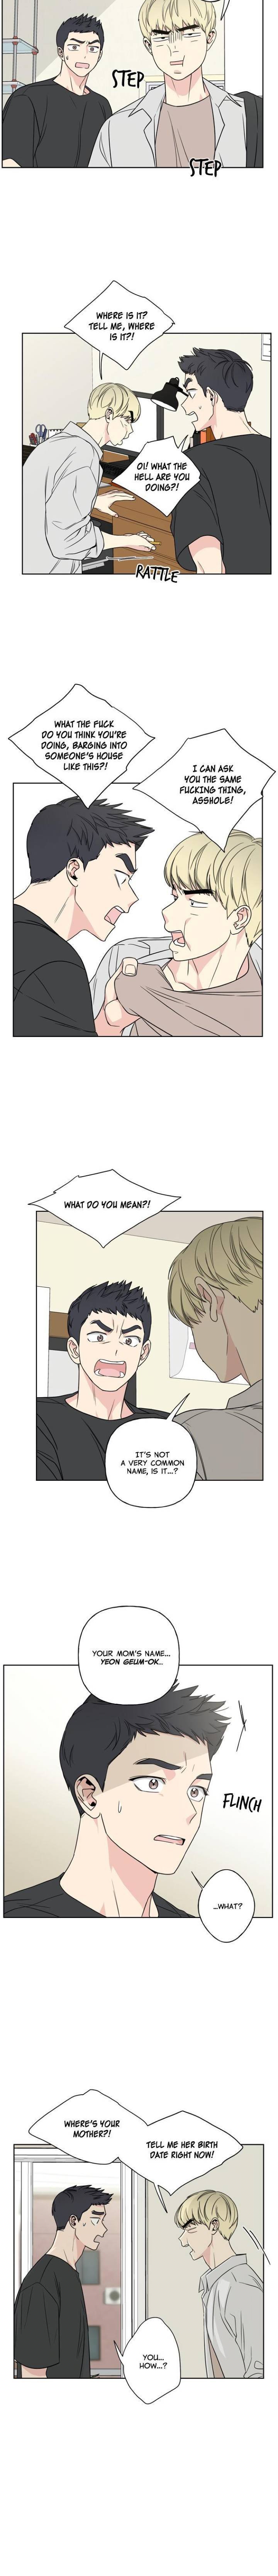 mother-im-sorry-chap-21-11